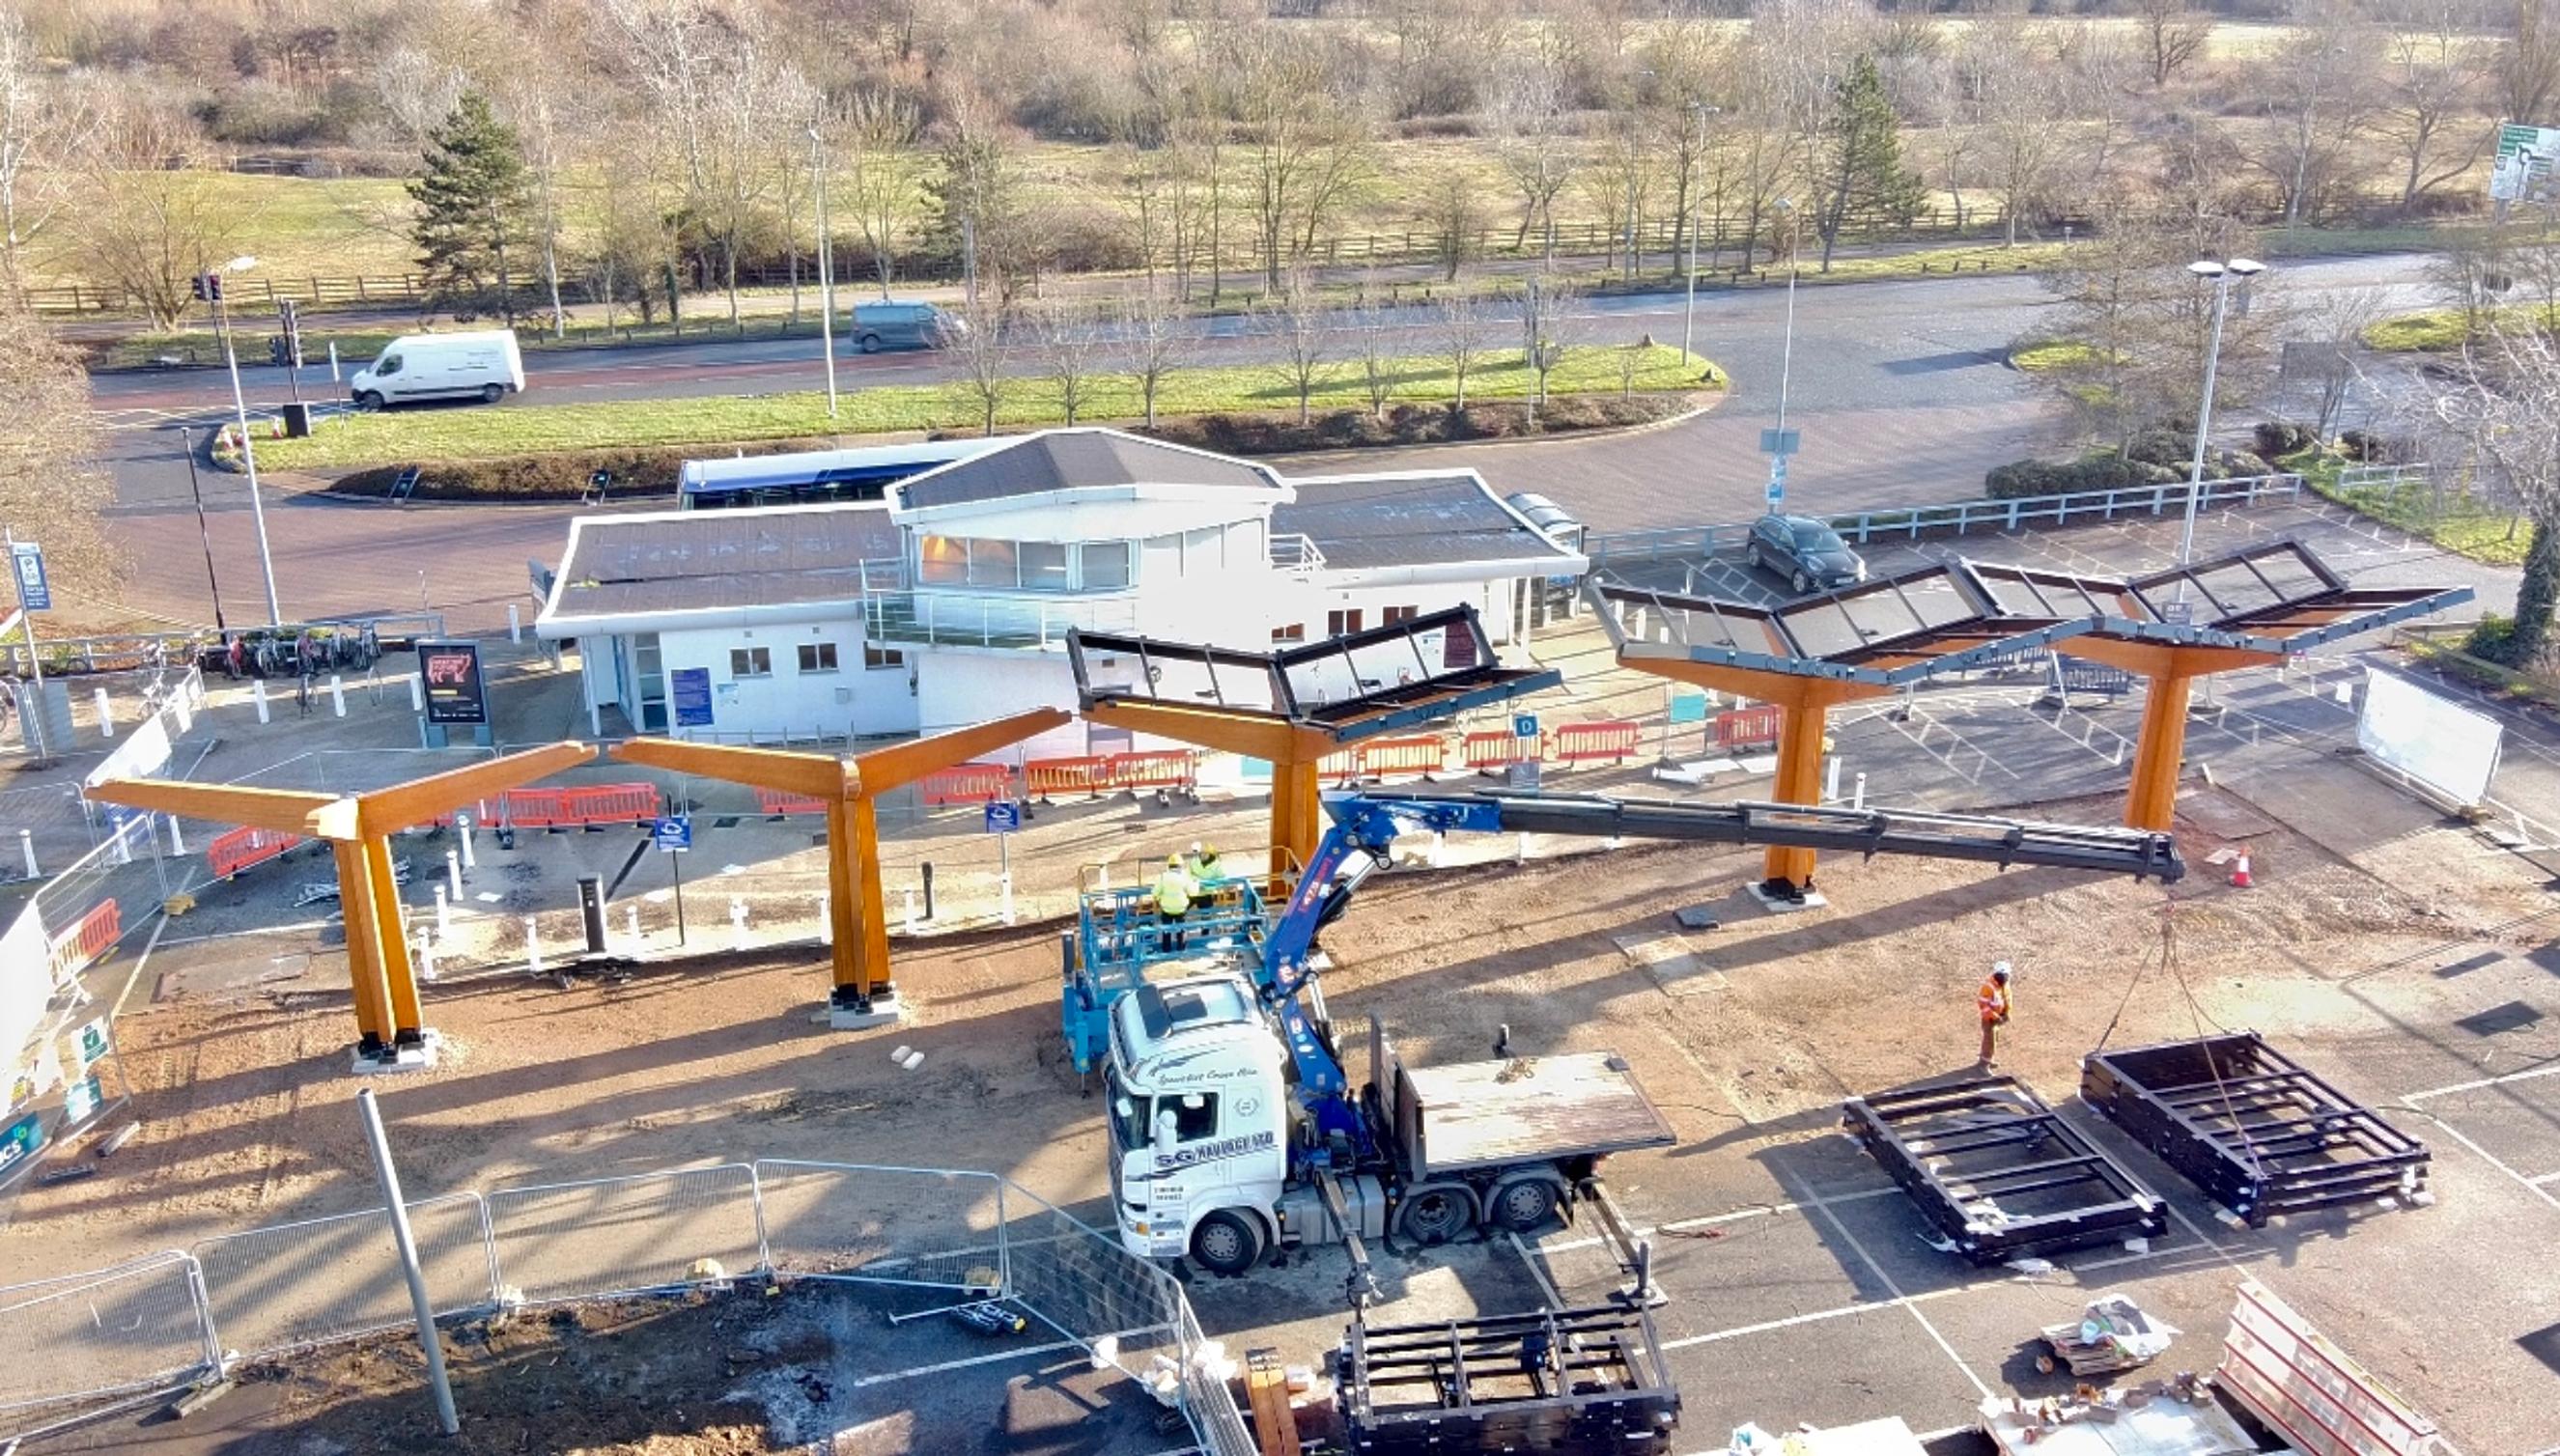 Chargepoint hub canopies being erected at the Redbridge park & ride site